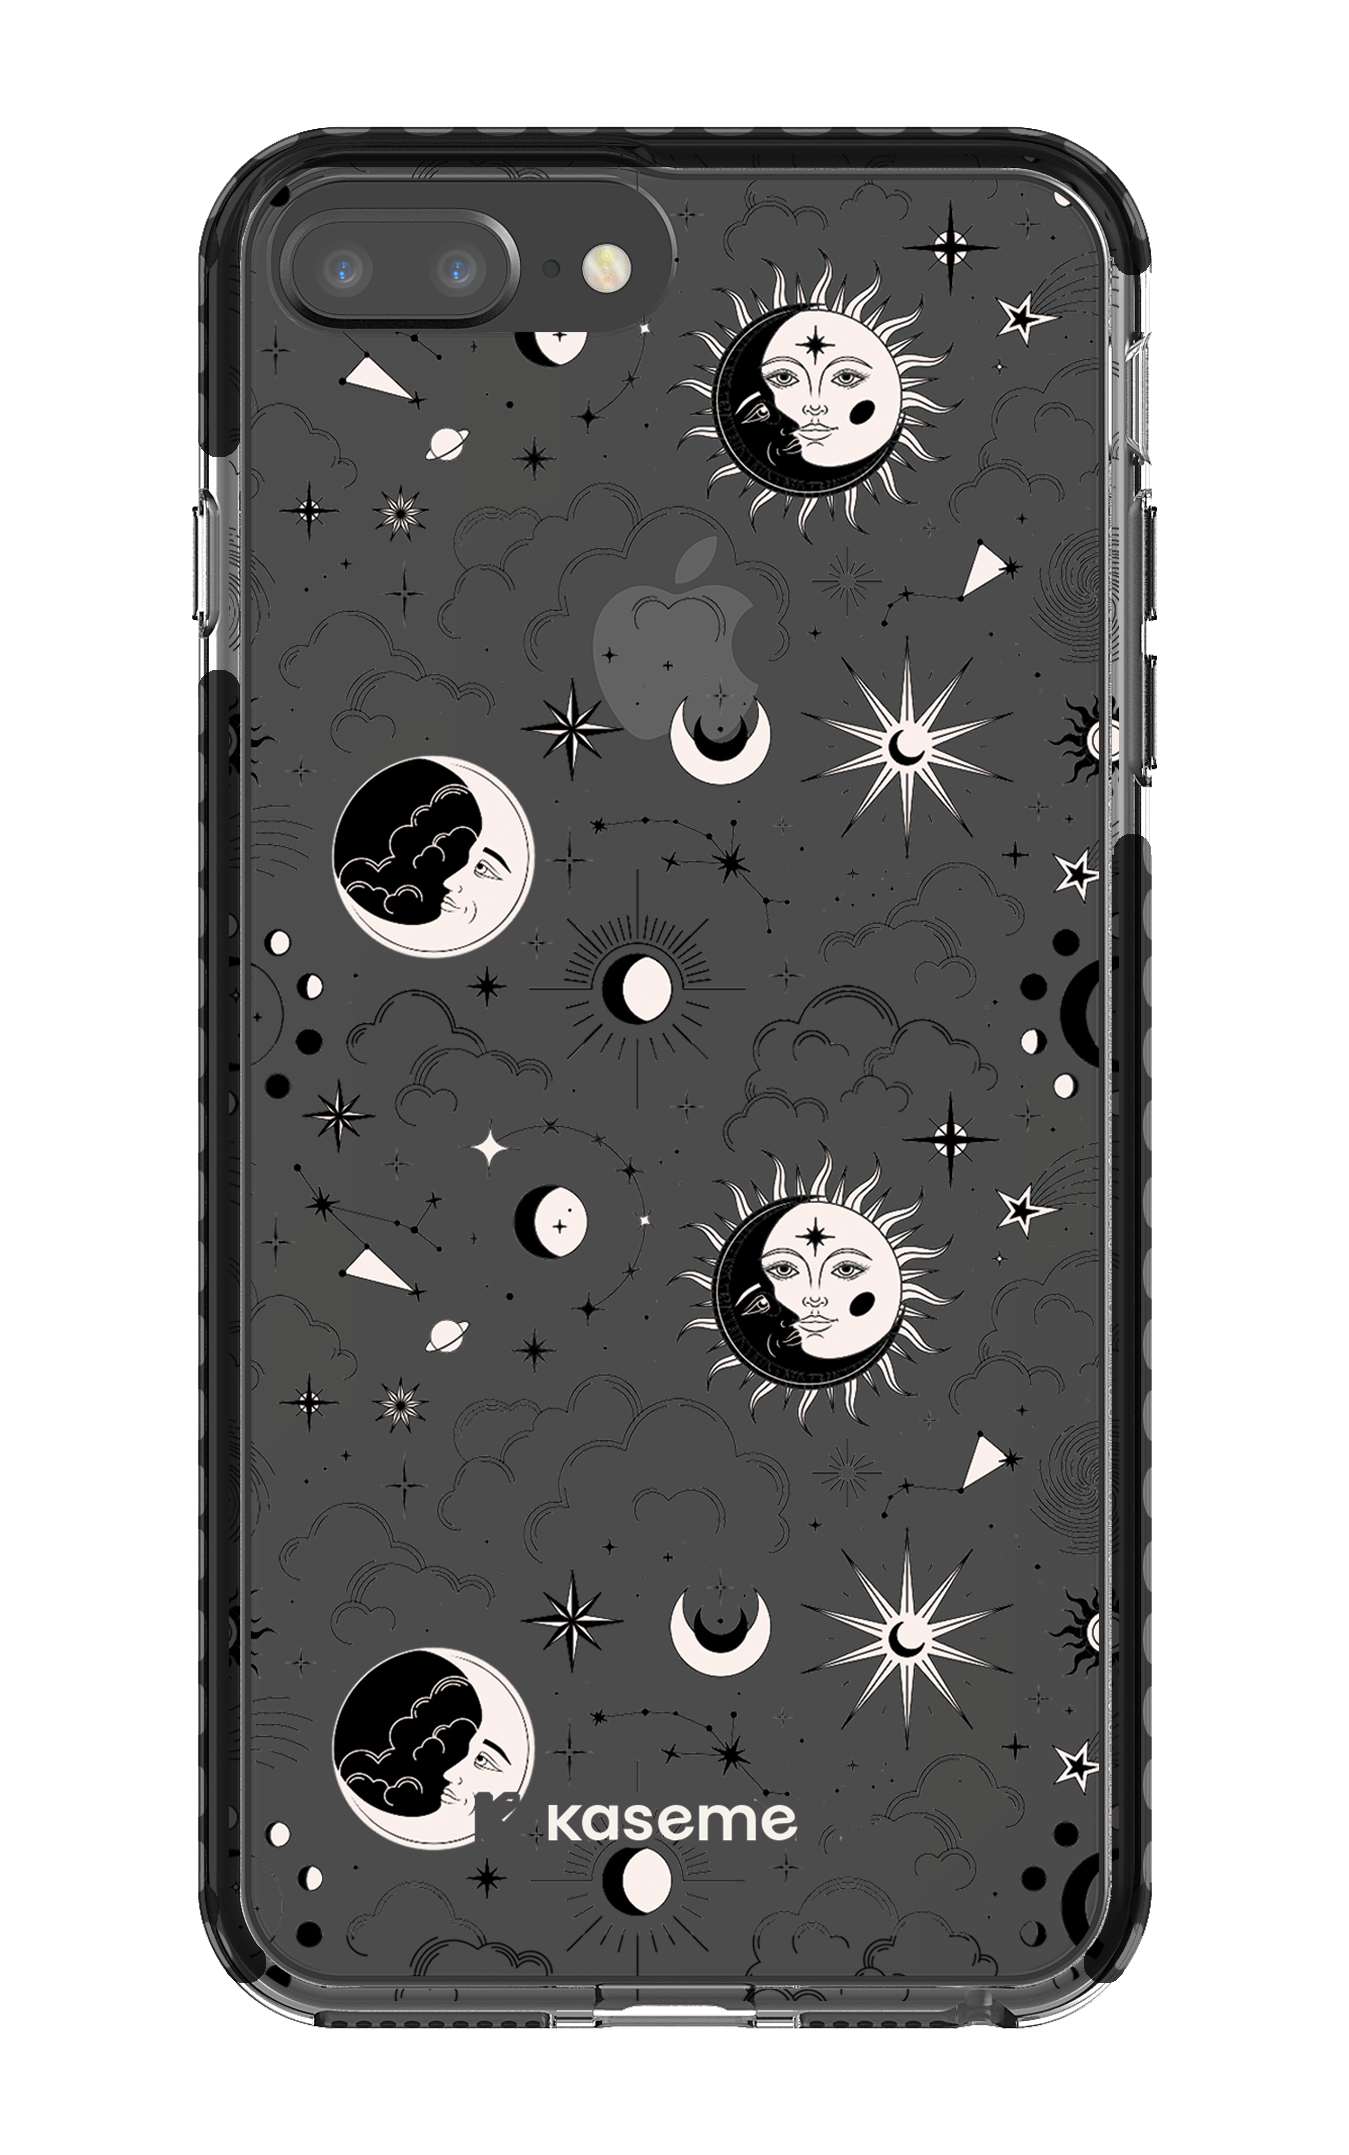 Milky Way Black Clear Case - iPhone 7/8 Plus